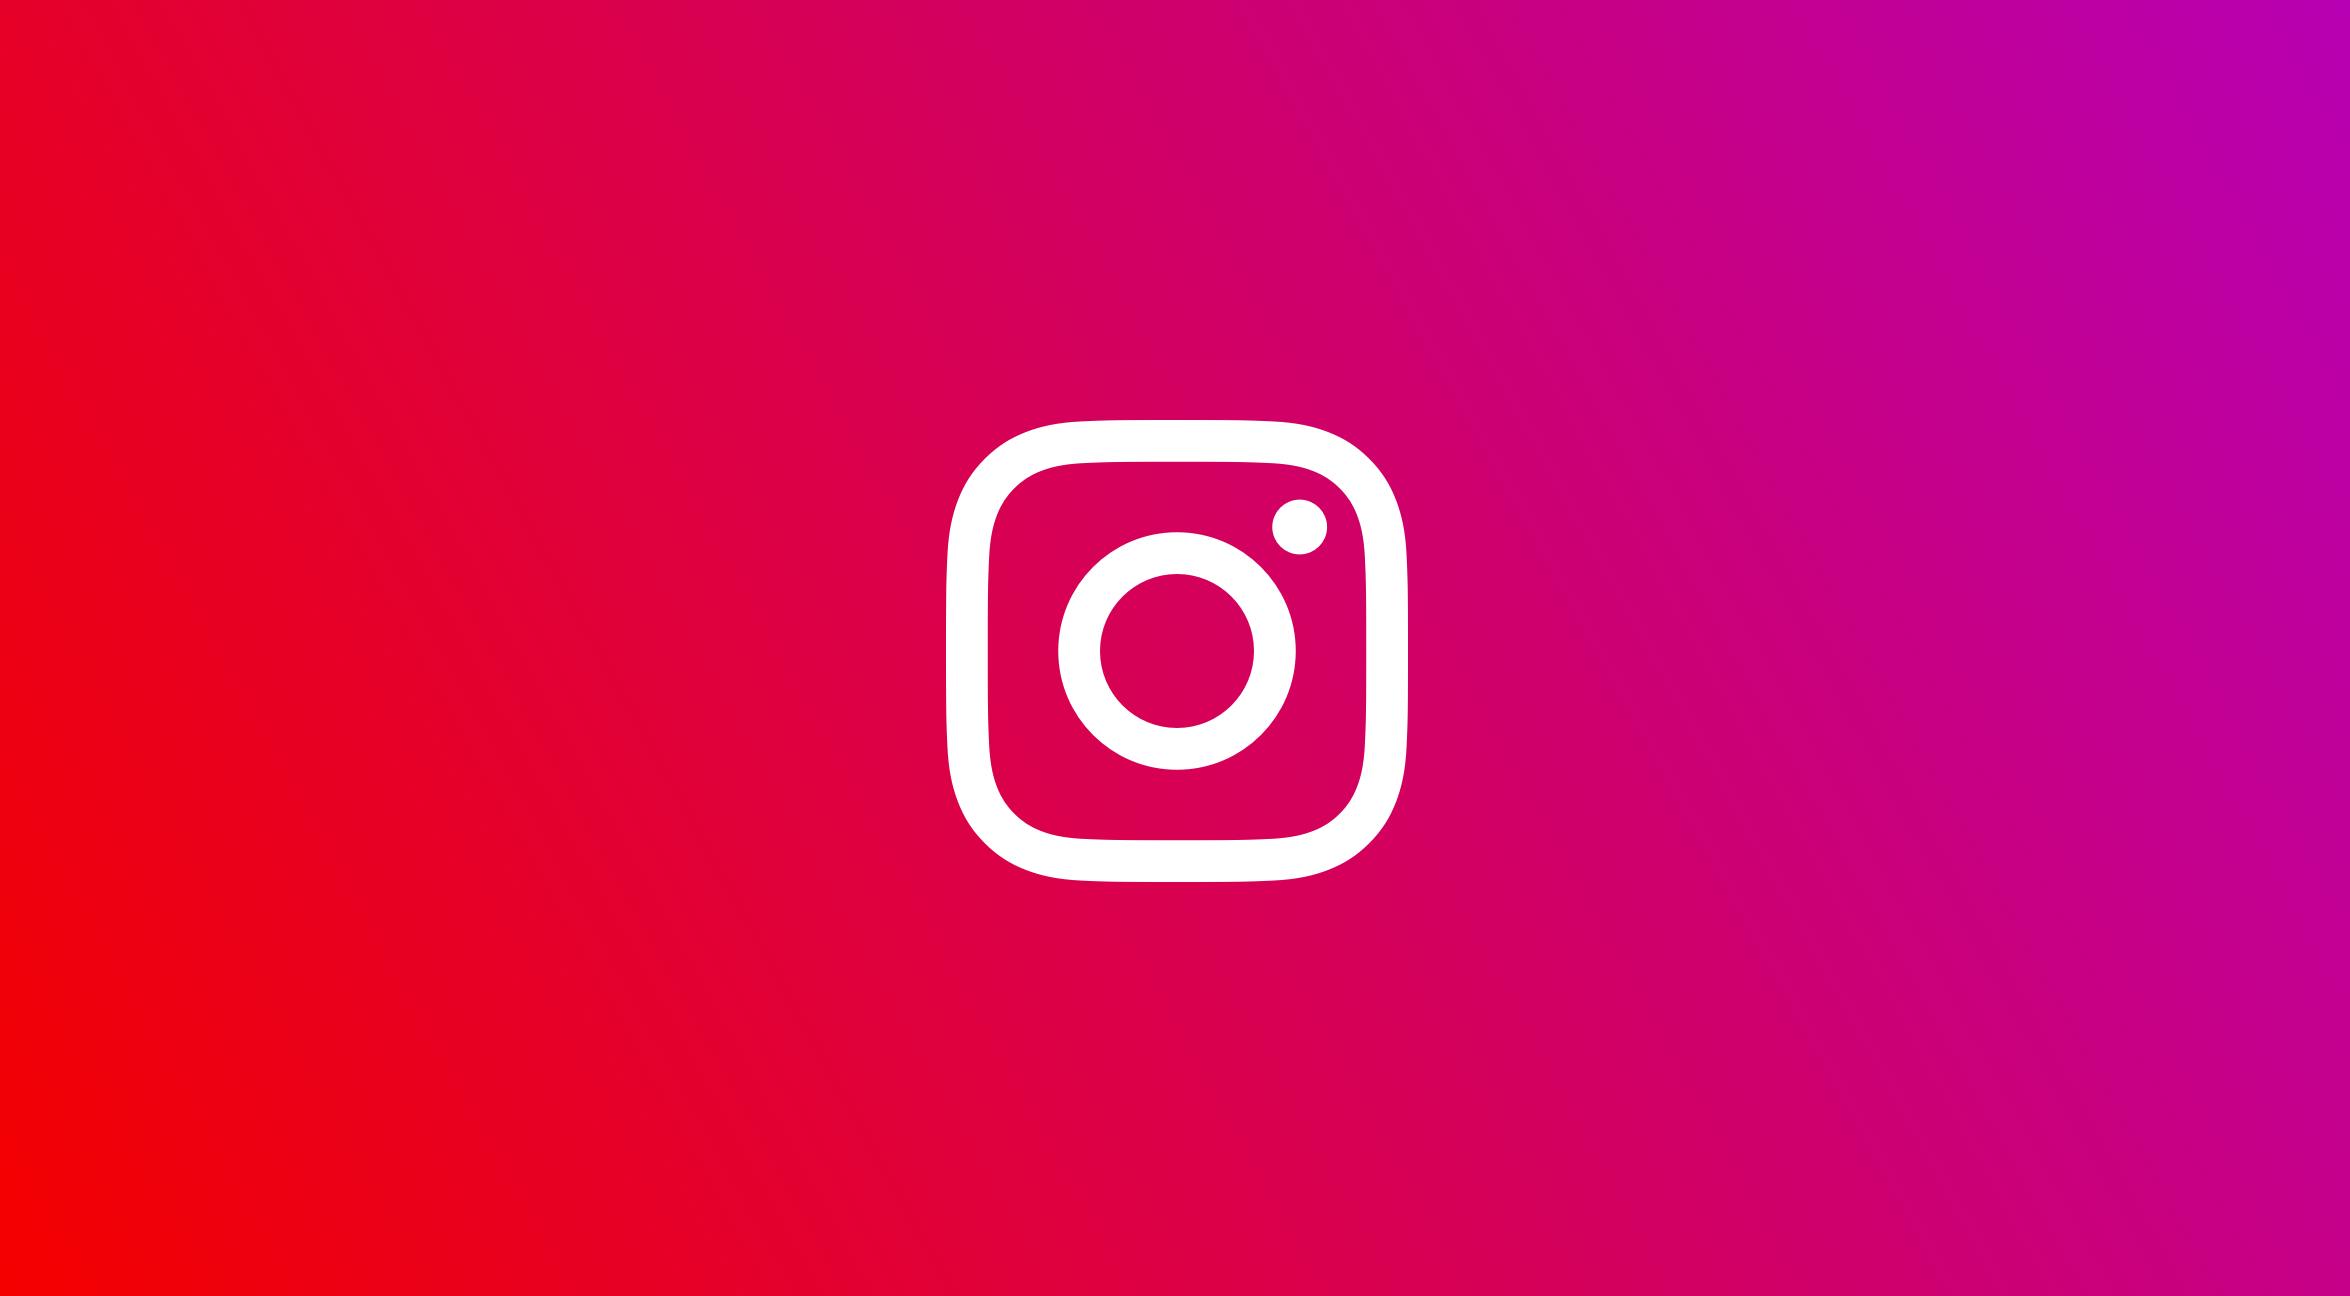 How to add music to your instagram posts?